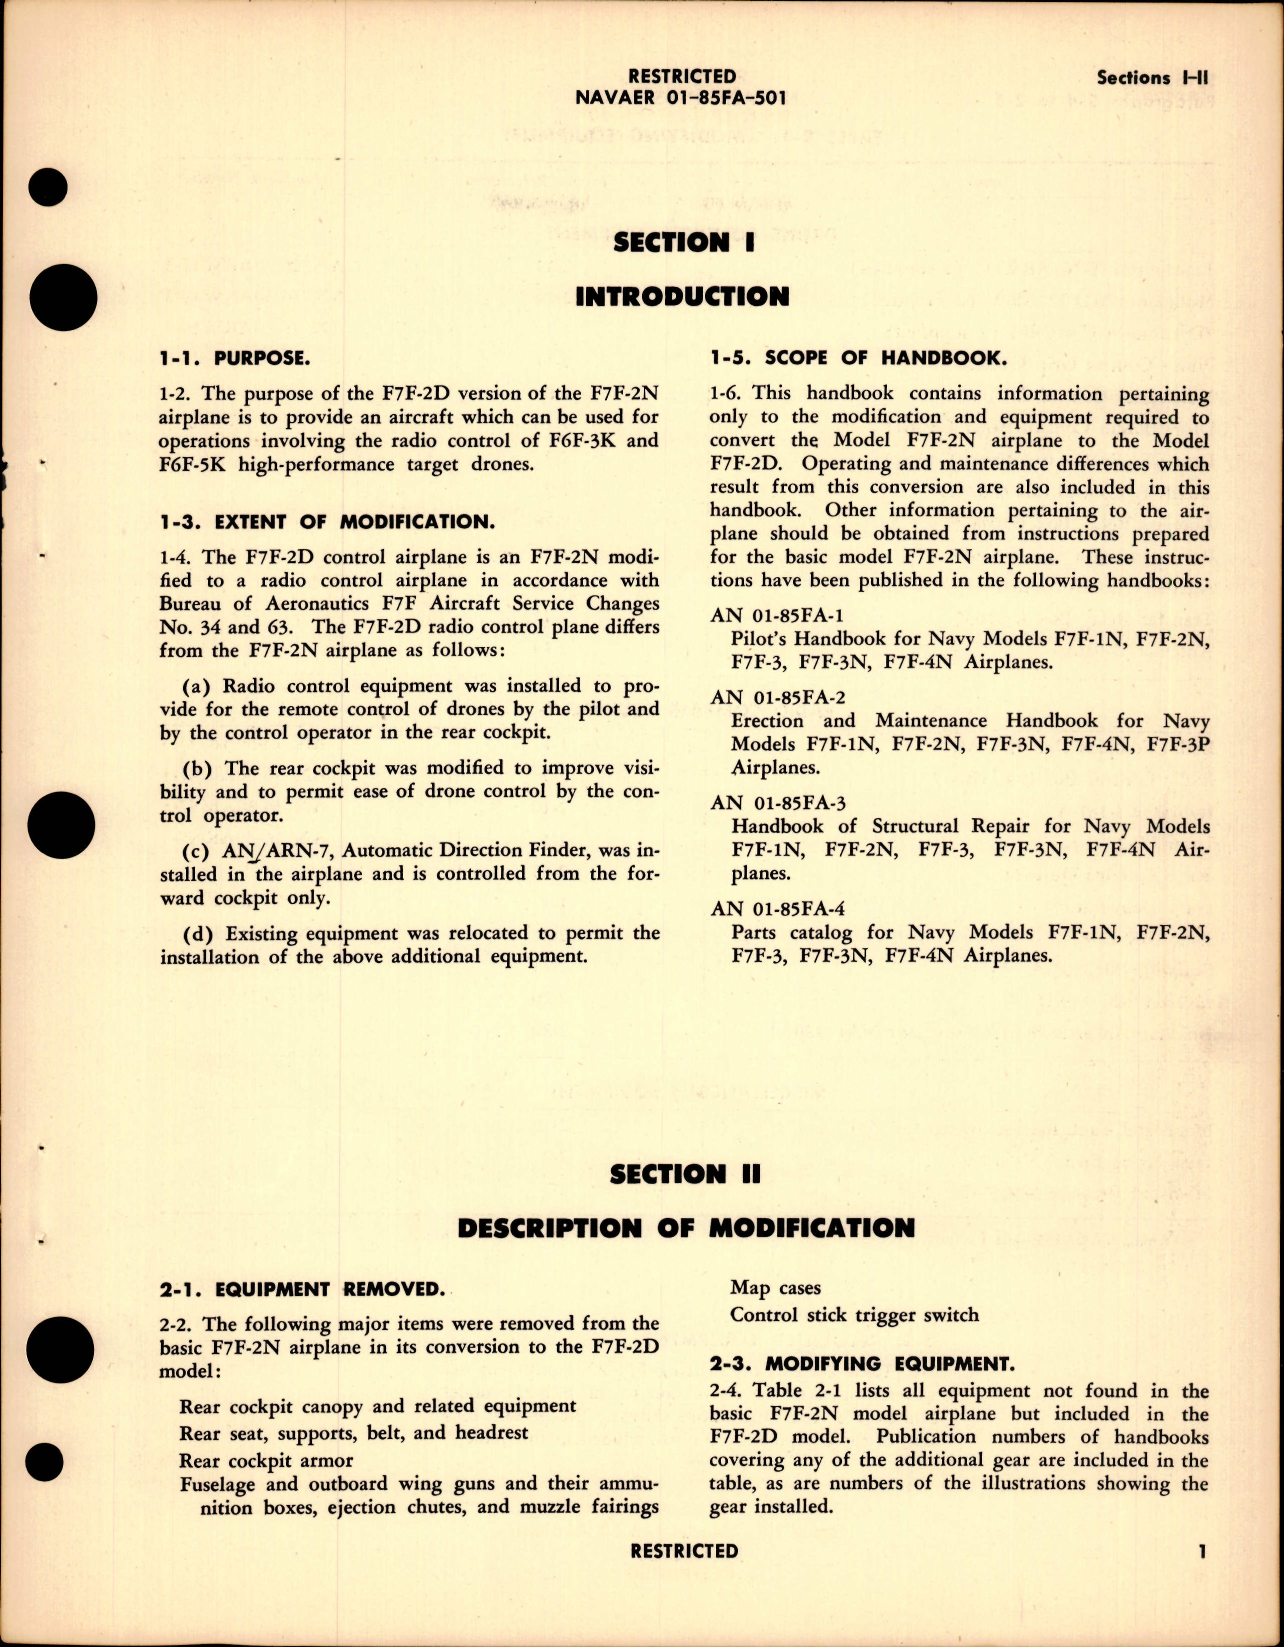 Sample page 5 from AirCorps Library document: Handbook of Instructions with Parts Catalog for F7F-2D